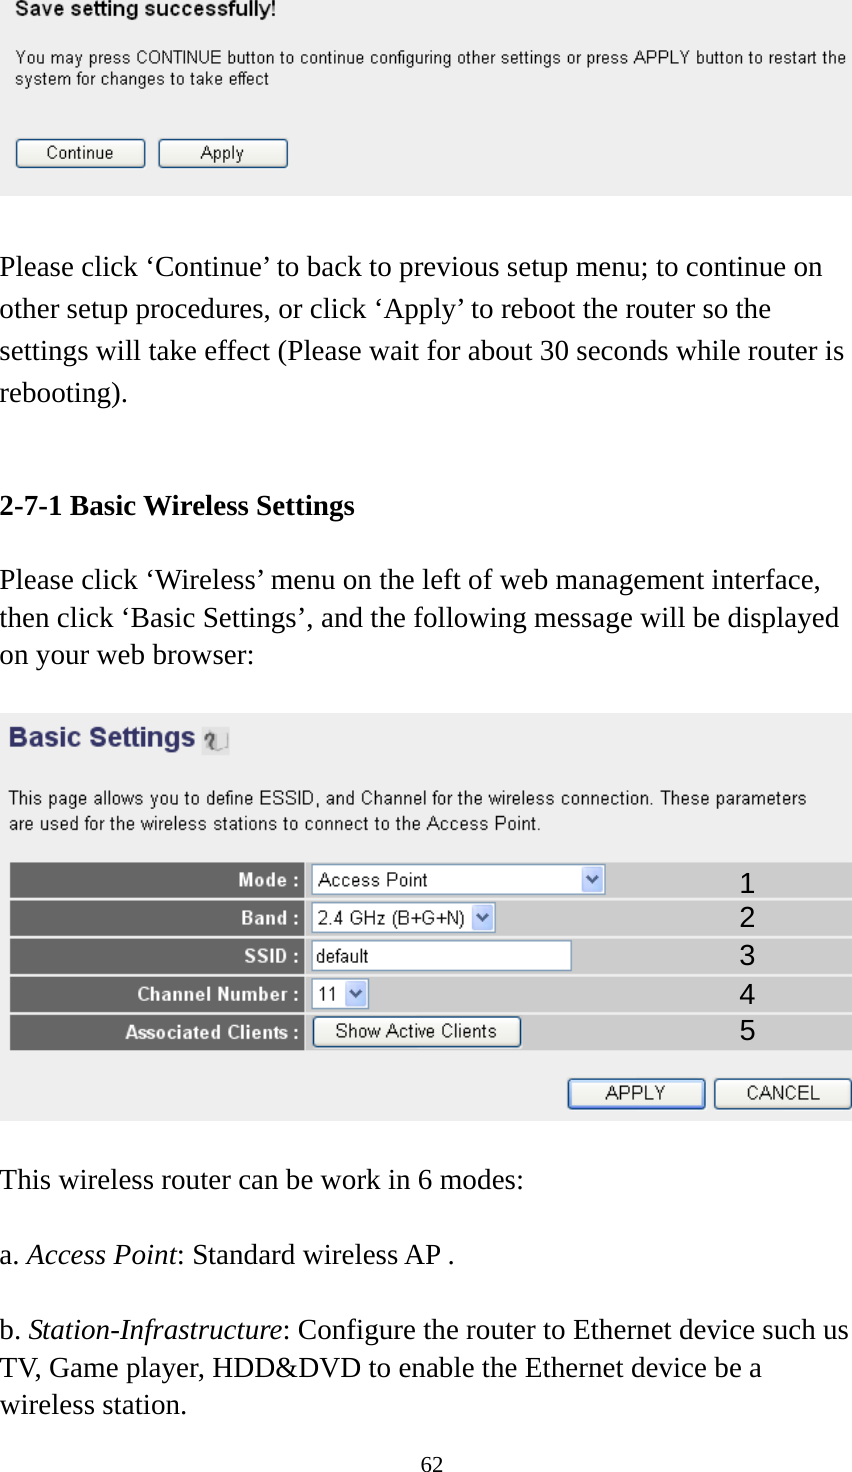 62   Please click ‘Continue’ to back to previous setup menu; to continue on other setup procedures, or click ‘Apply’ to reboot the router so the settings will take effect (Please wait for about 30 seconds while router is rebooting).   2-7-1 Basic Wireless Settings  Please click ‘Wireless’ menu on the left of web management interface, then click ‘Basic Settings’, and the following message will be displayed on your web browser:    This wireless router can be work in 6 modes:    a. Access Point: Standard wireless AP .  b. Station-Infrastructure: Configure the router to Ethernet device such us TV, Game player, HDD&amp;DVD to enable the Ethernet device be a wireless station. 1 2 3 4 5 